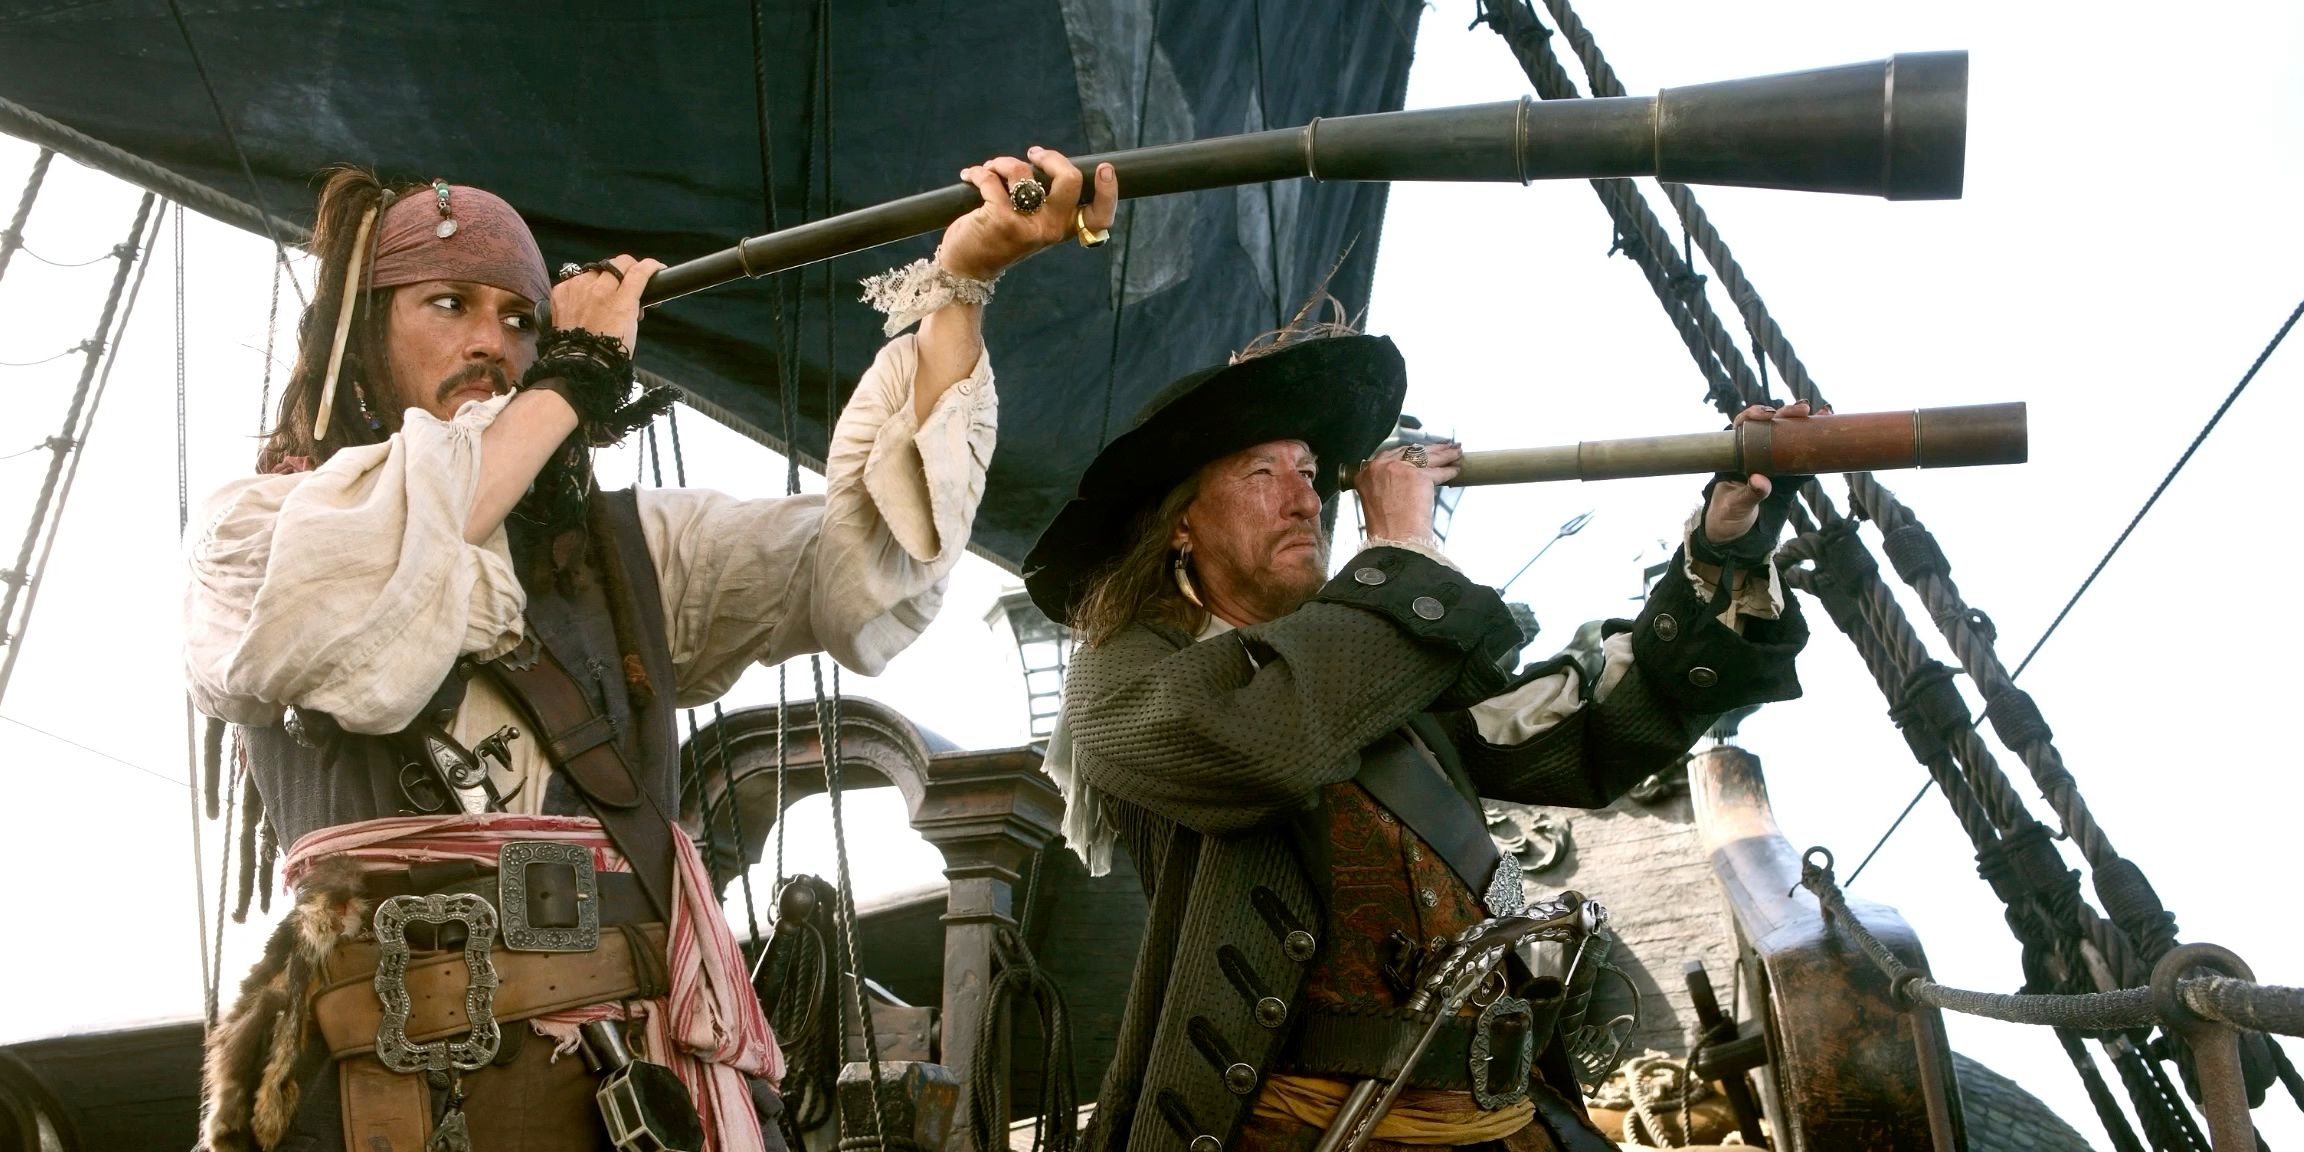 Johnny Depp and Geoffrey Rush in Pirates of the Caribbean.